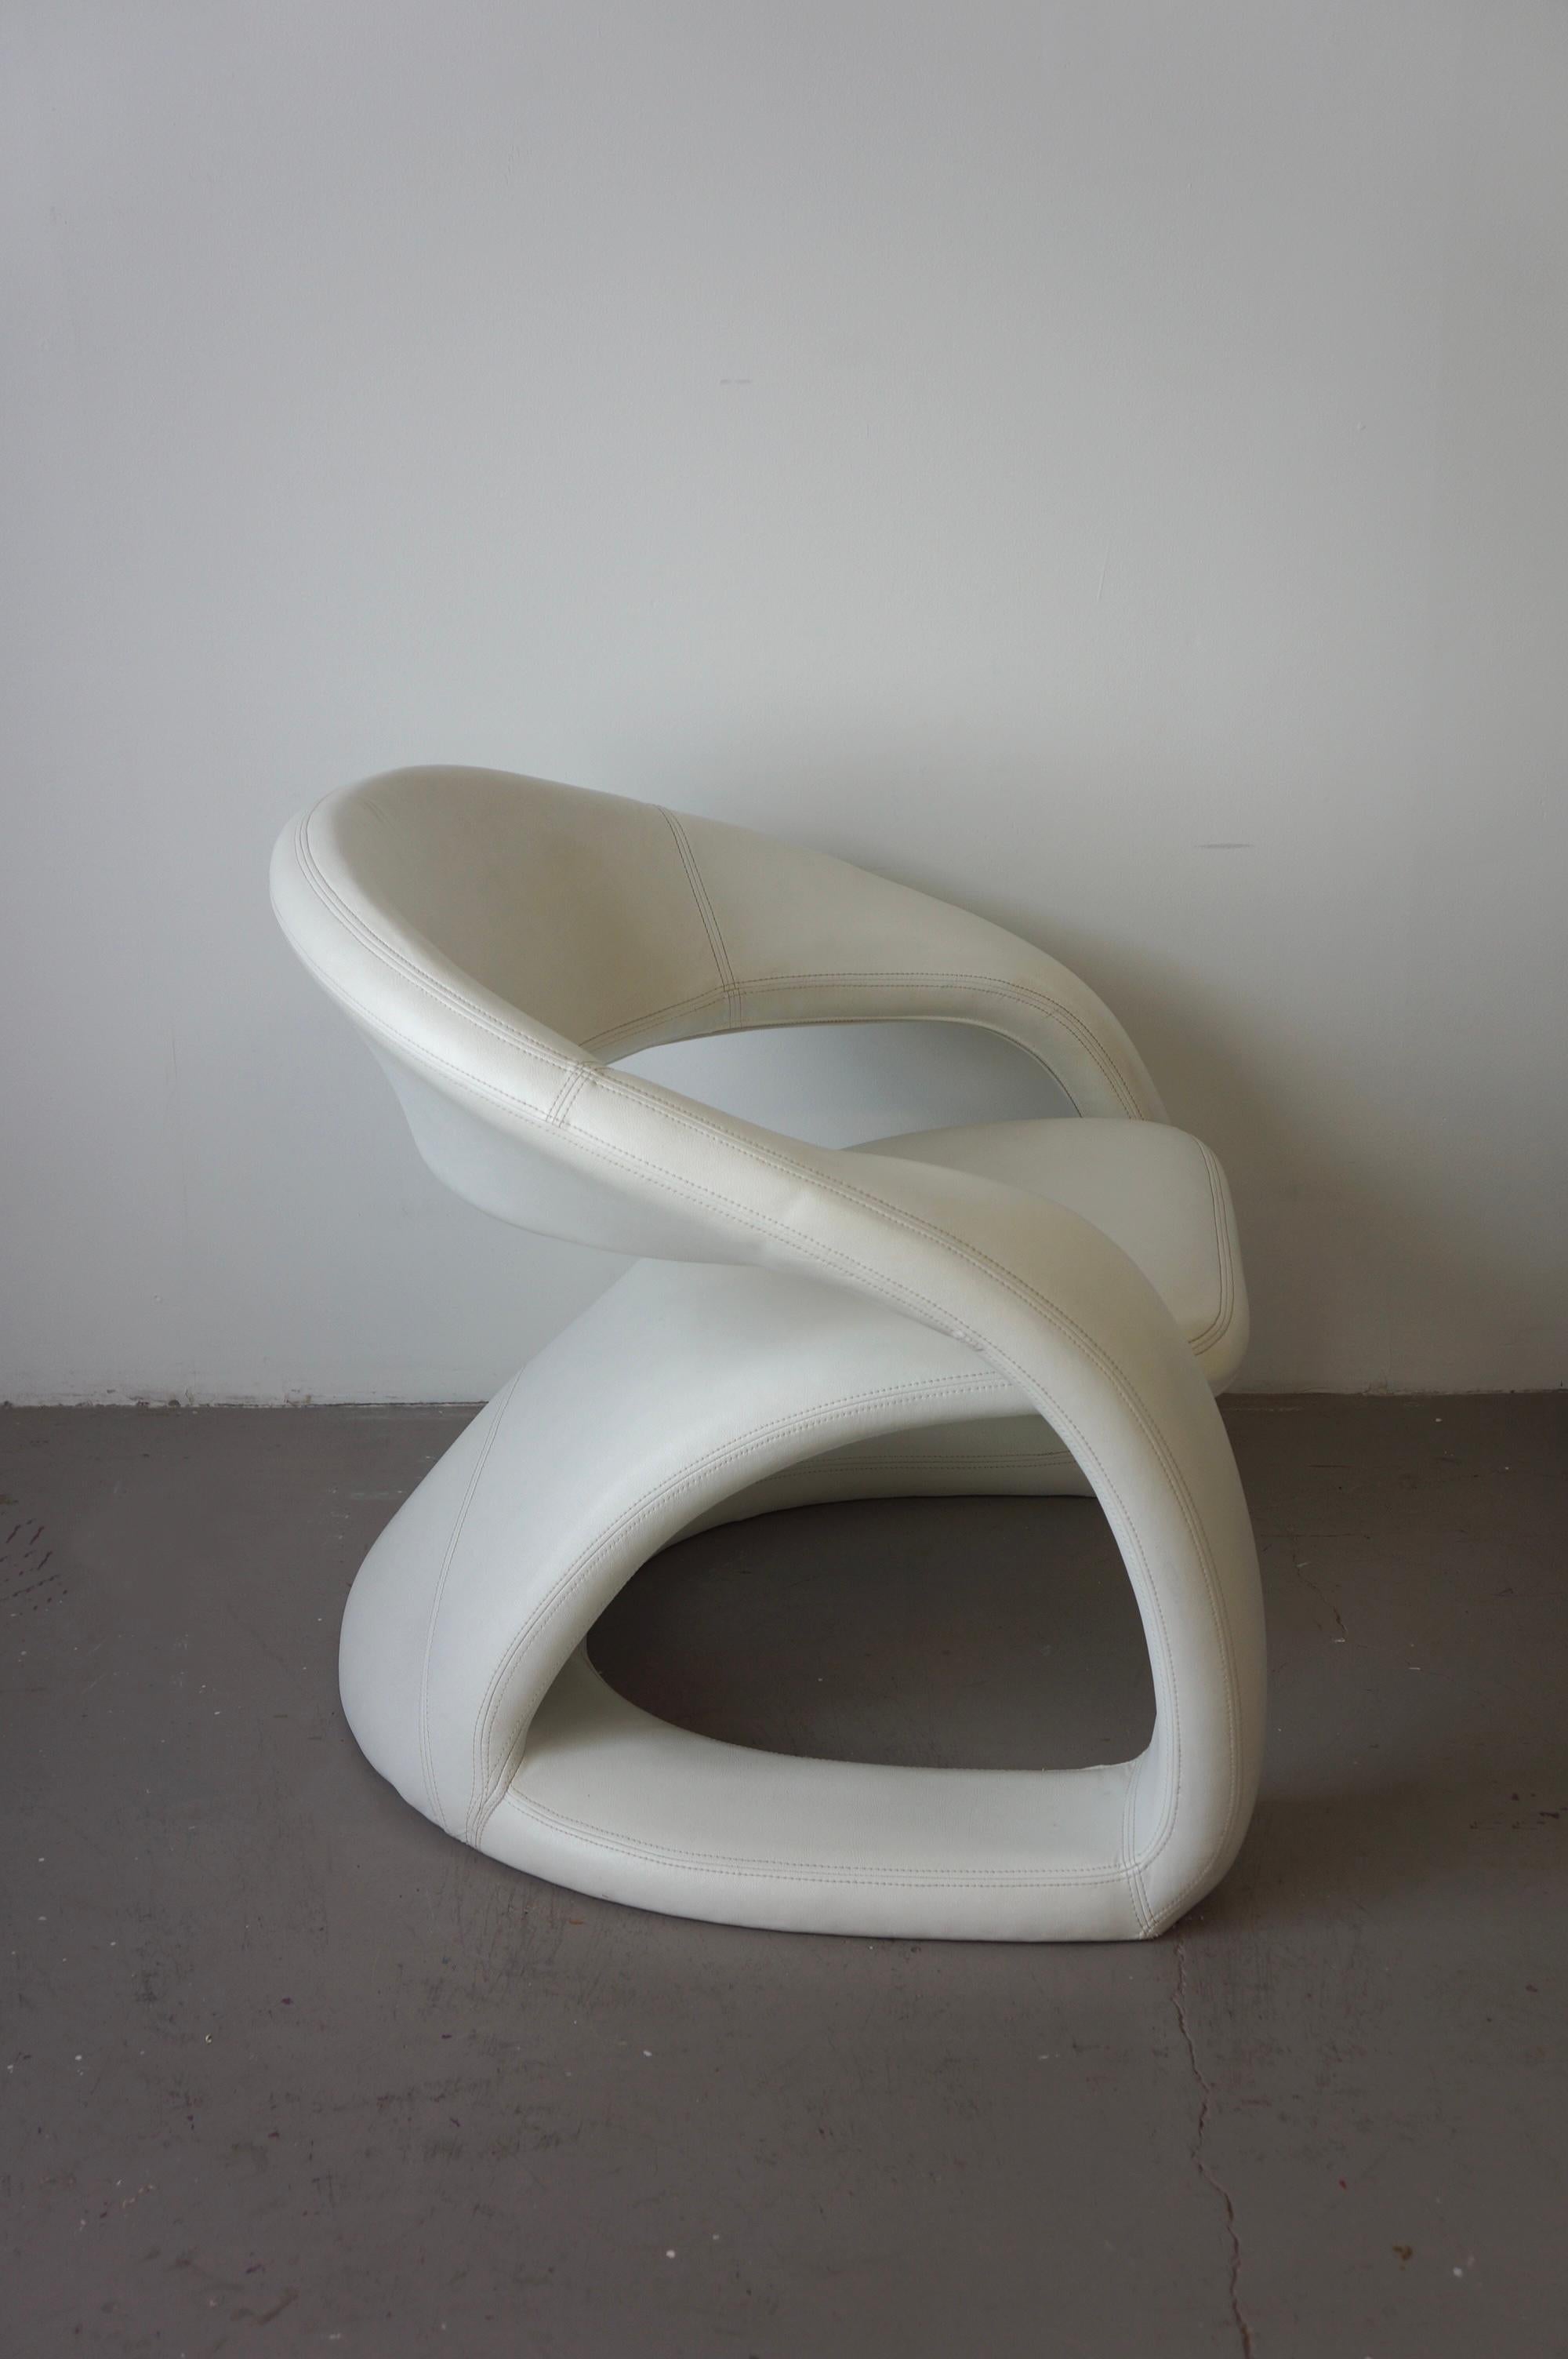 Gorgeous pop art chair by Jaymar in white PU leather. This bold and modern chair was made in Quebec in the 1980s. It’s cantilevered with an angular back and high arms. The sculptural chair defined by its continuous lines and elegant angular design.